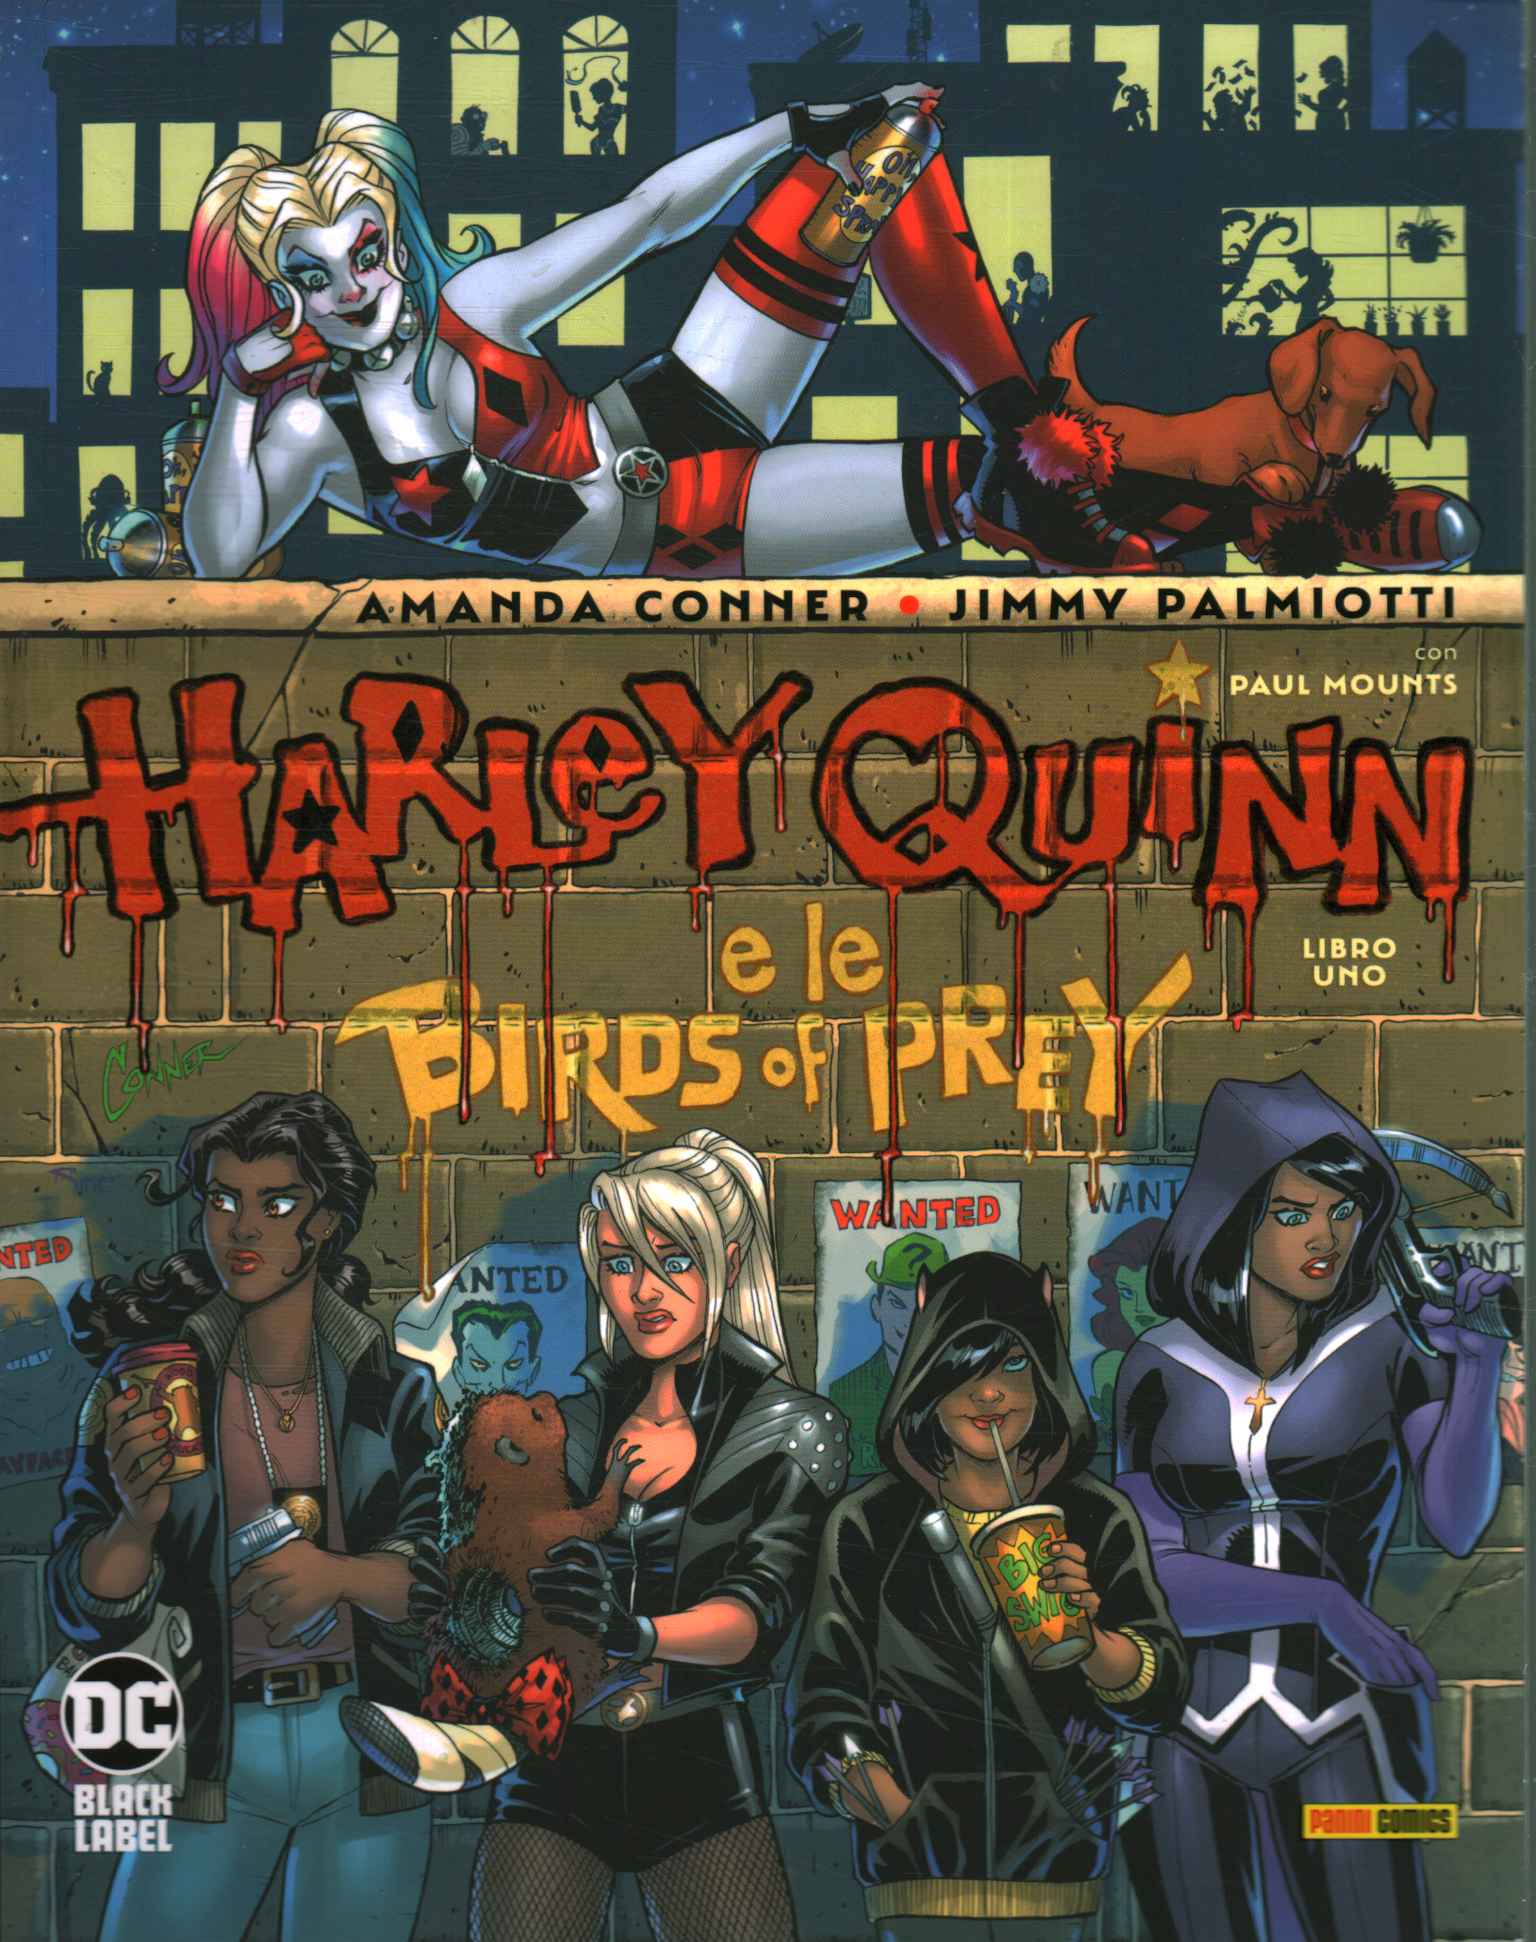 Harley Quinn and the Birds of Prey. Ser